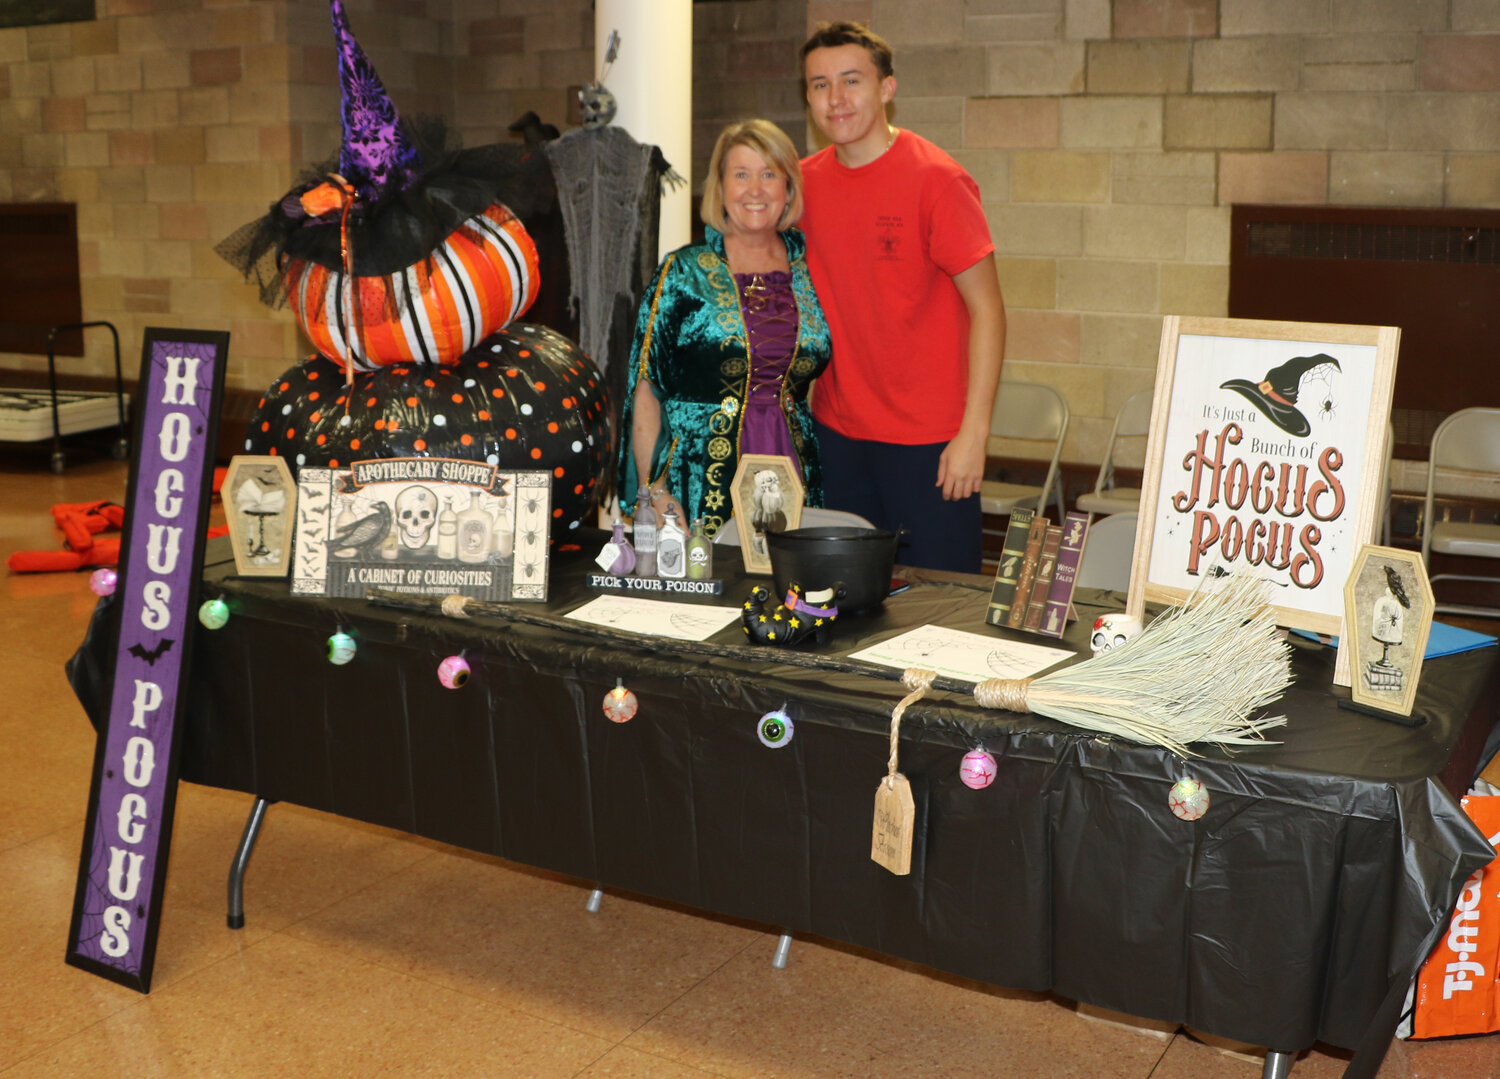 Kimberly Casio with her son CJ Casio at their table that is decorated as Hocus Pocus. The table won first place for best Halloween table set.